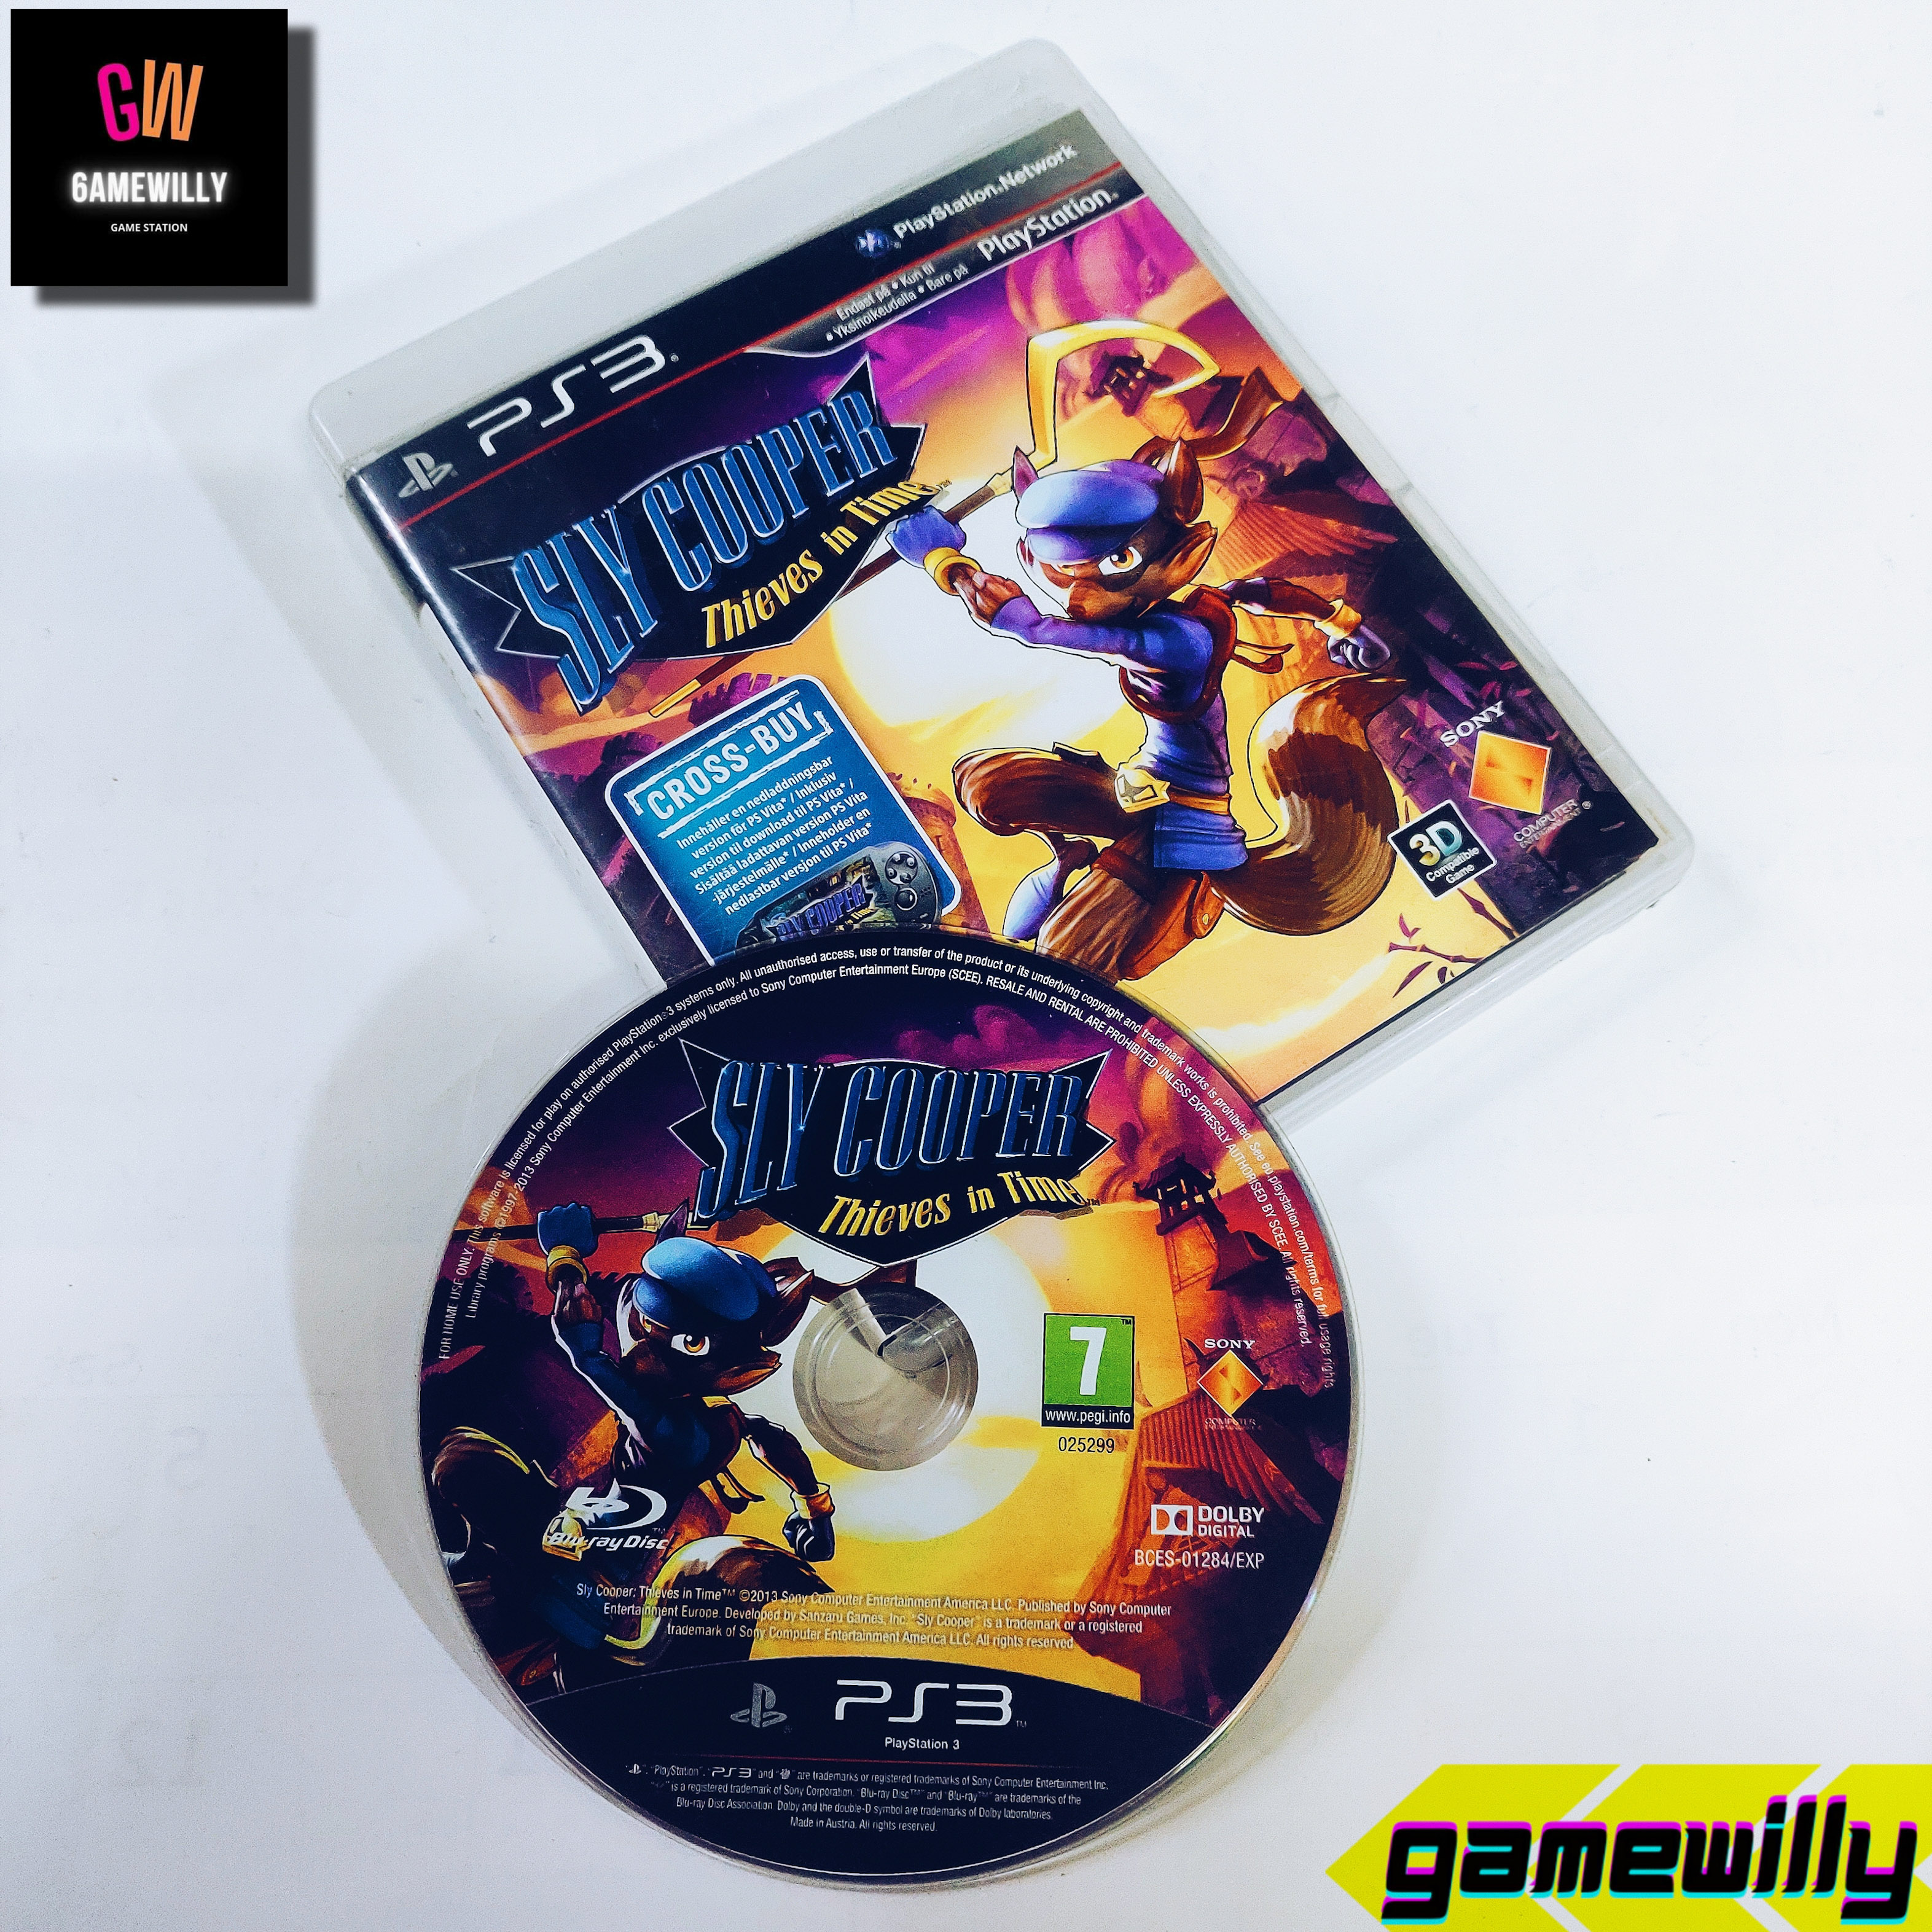 Sly ps3. Слай Купер ps3. Sly Cooper Thieves in time ps3. Sly Cooper Trilogy ps3 ISO. Sly ps3 Covers.